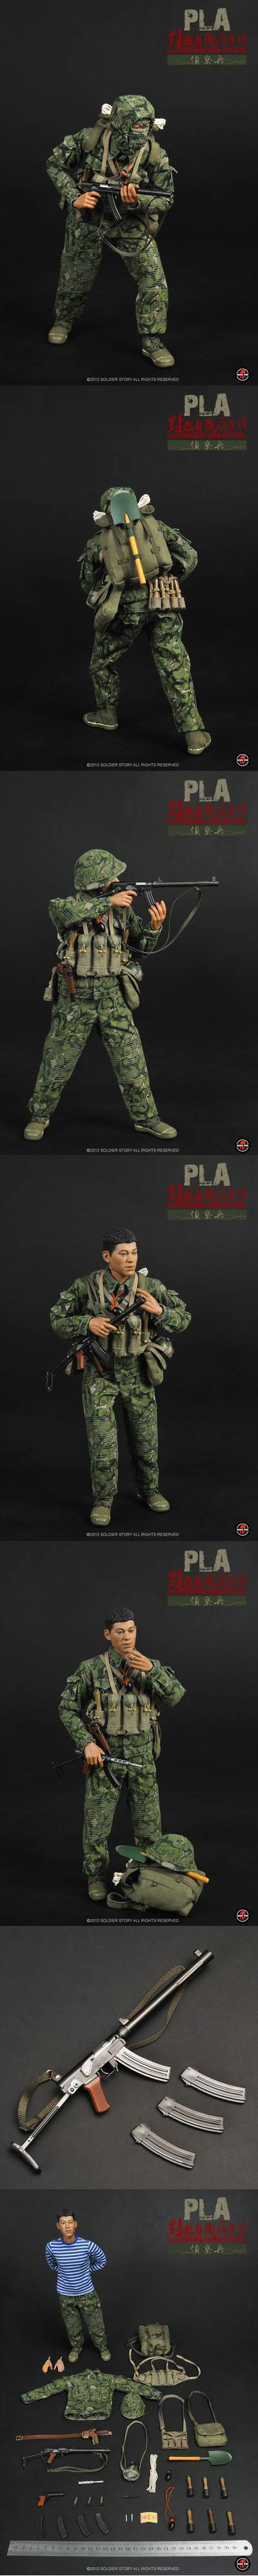 【Soldier Story】1/6 PLA Counterattack against Vietnam in Self-Defens 1979 対越自衛反撃戦 偵察兵